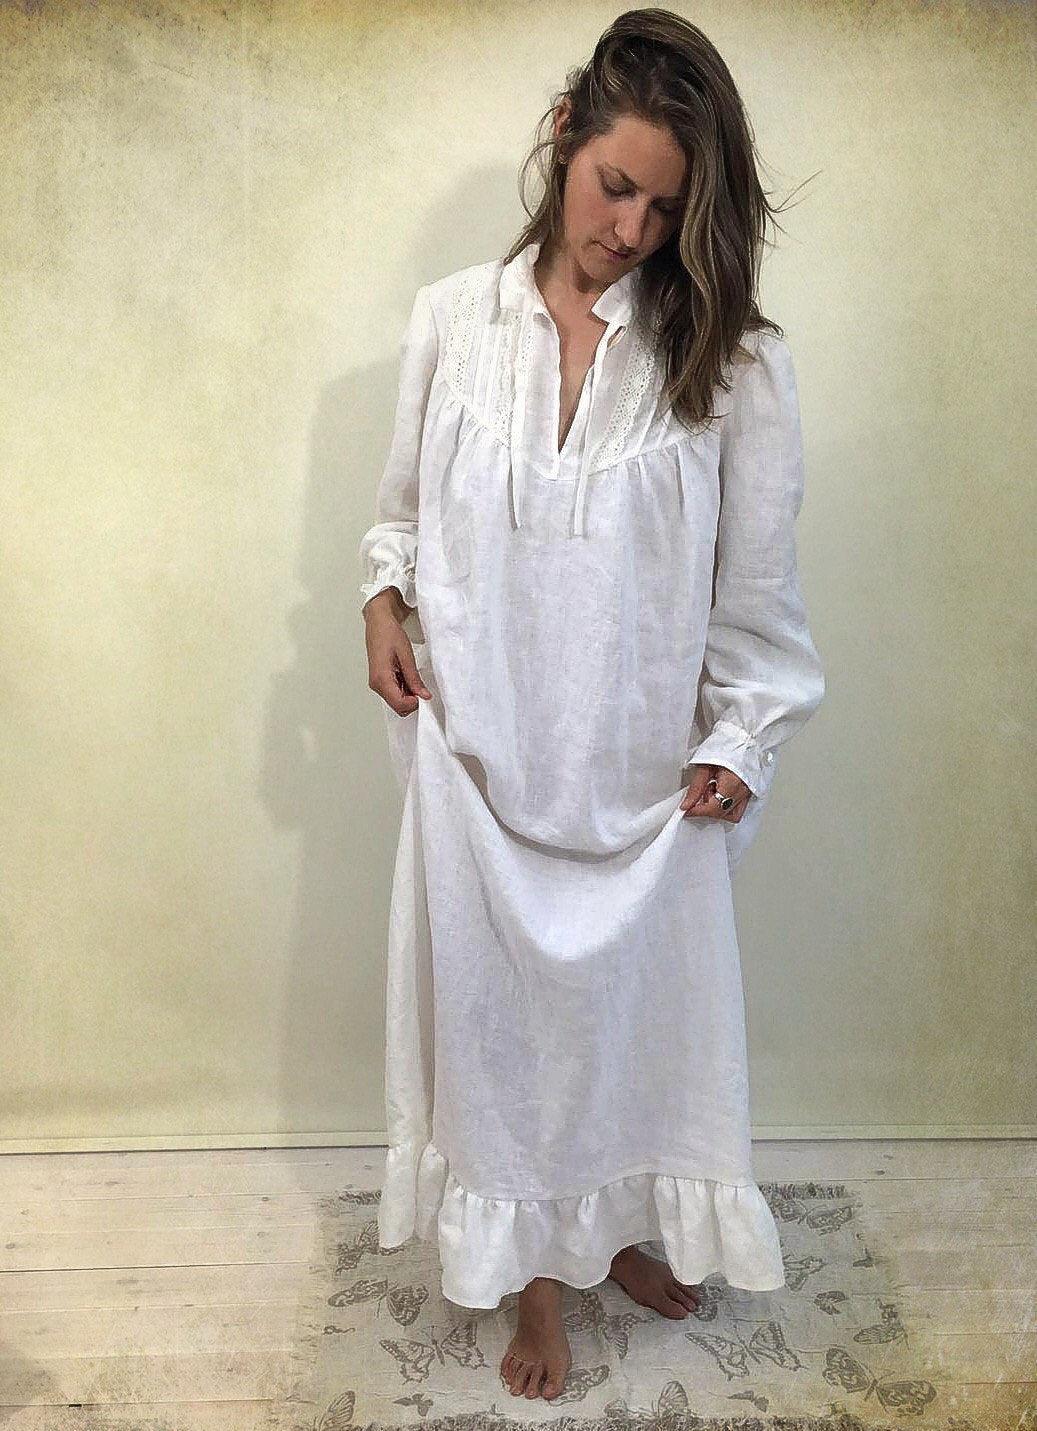 Linen nightgown, Handmade Victorian nightgown with lace - Linenbee